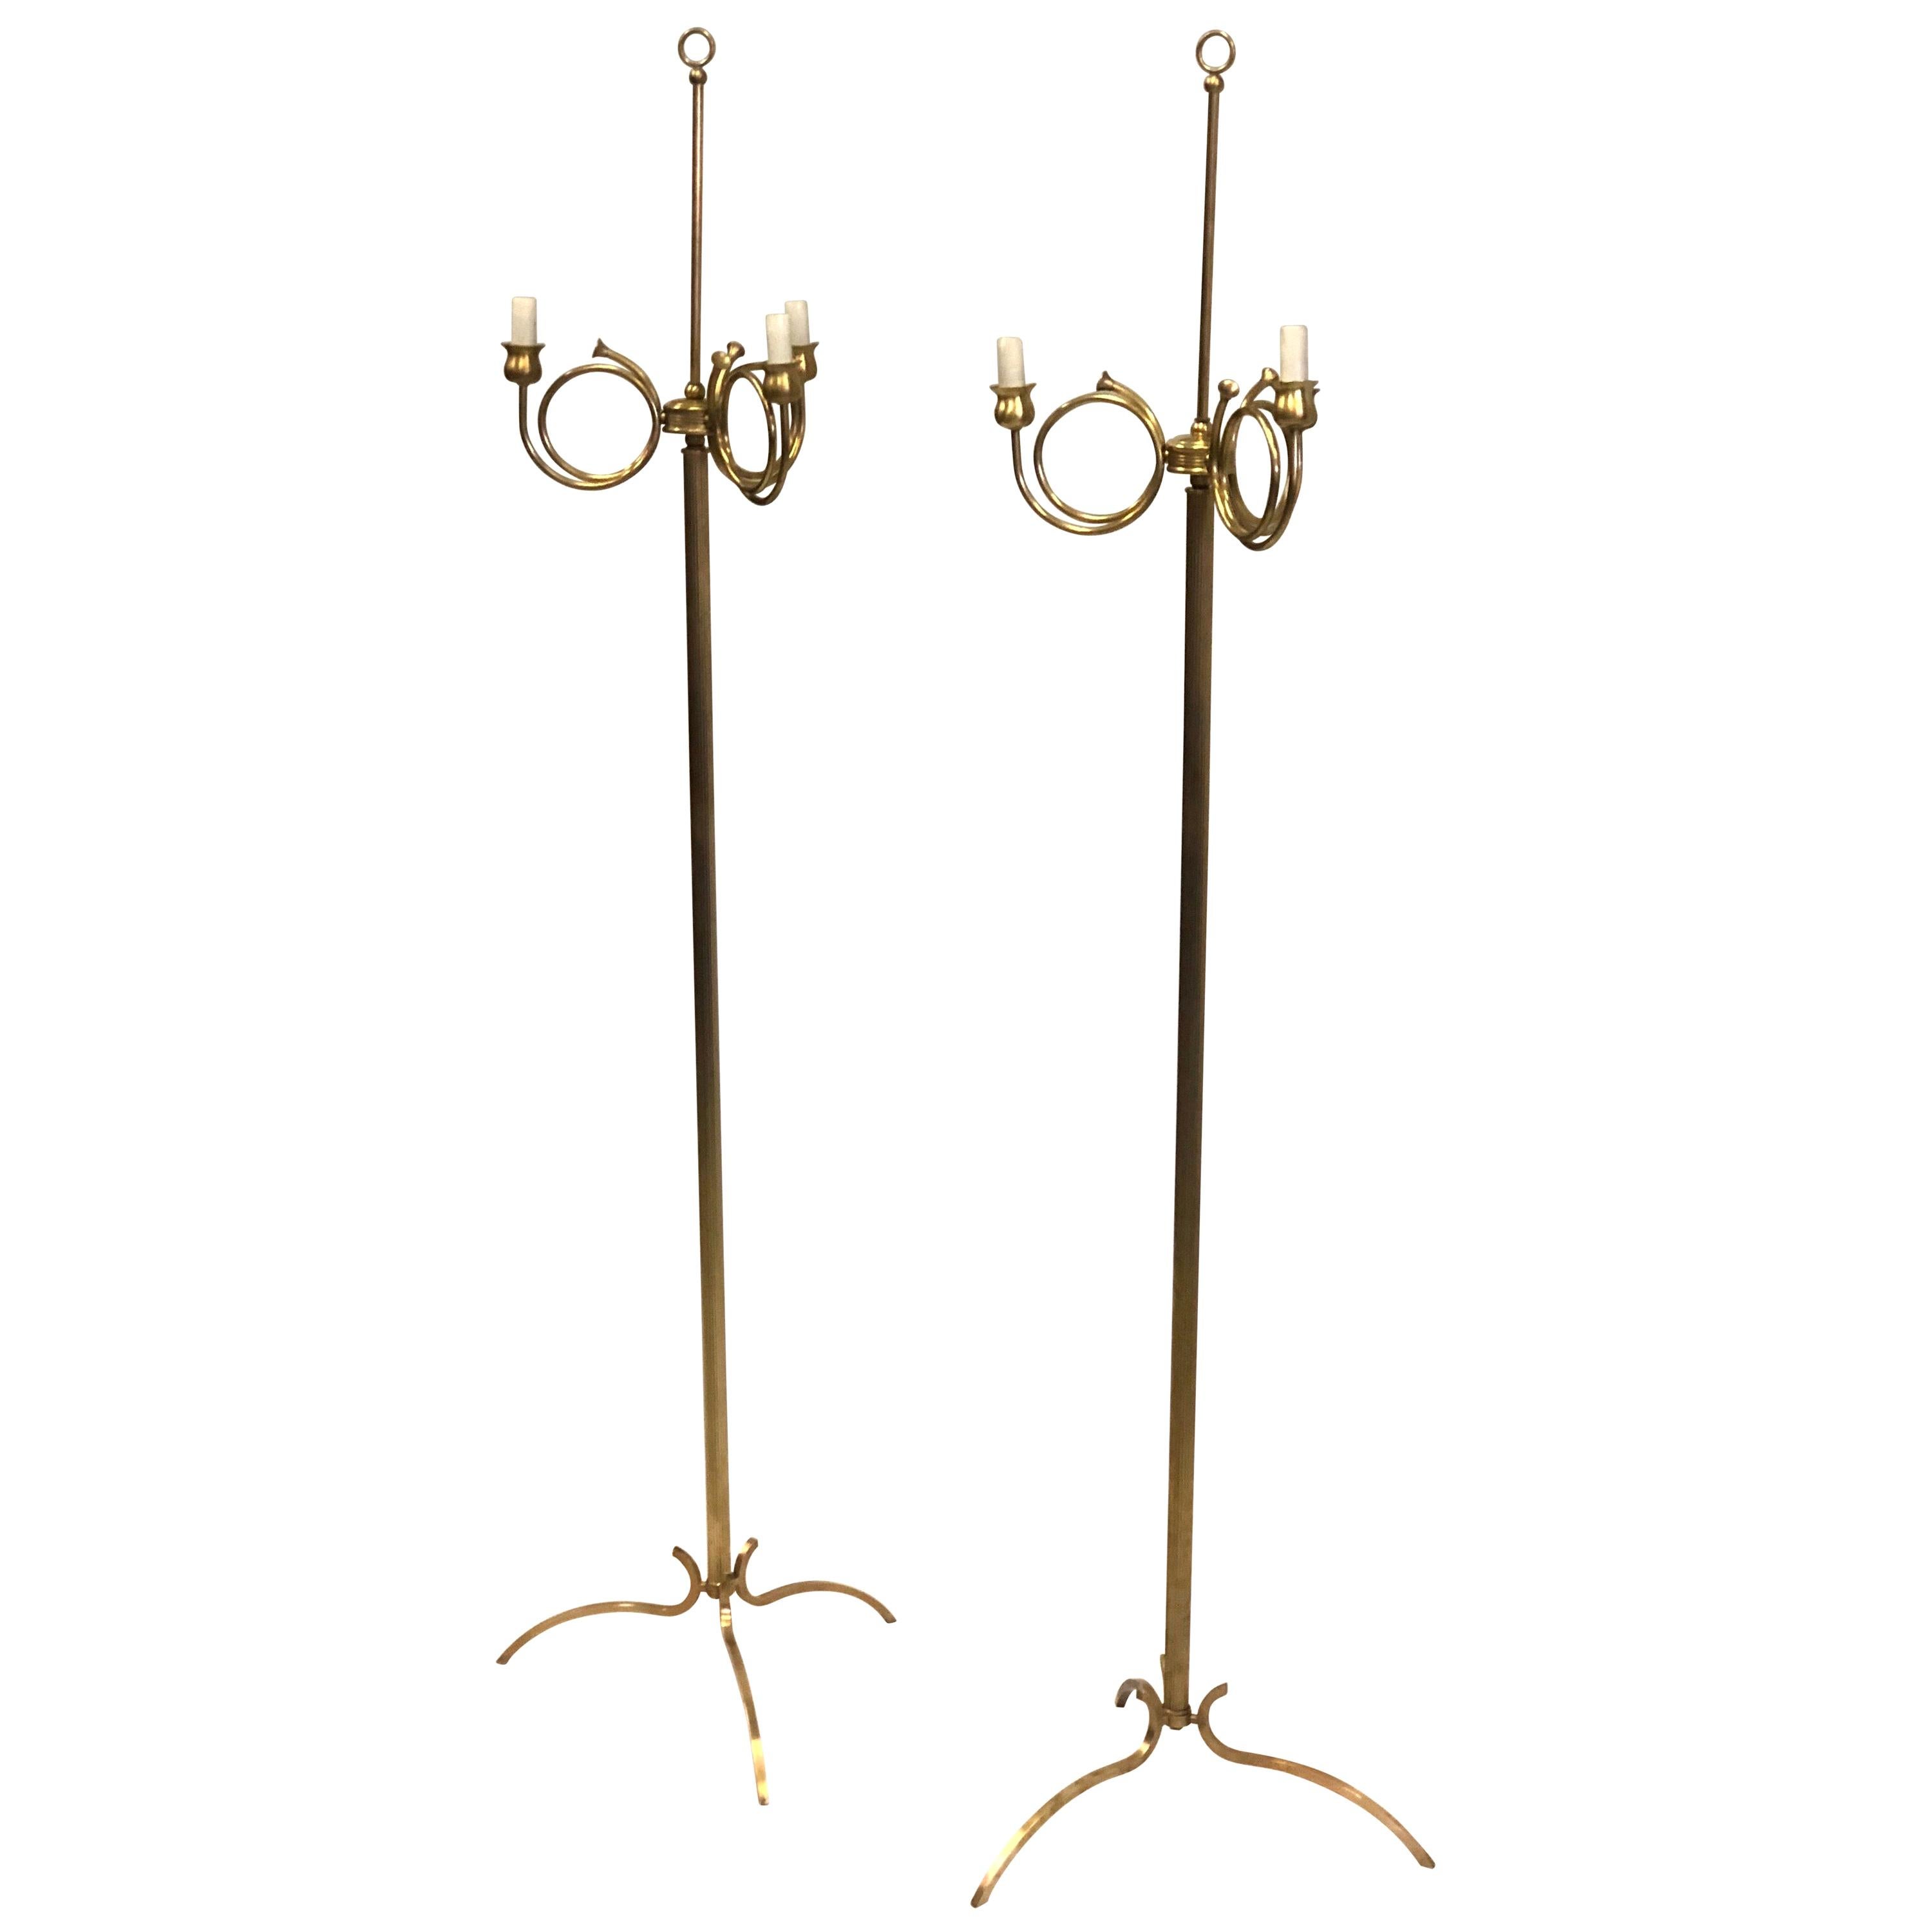 Pair of Mid-Century Modern Neoclassical Brass Floor Lamps by Maison Jansen For Sale